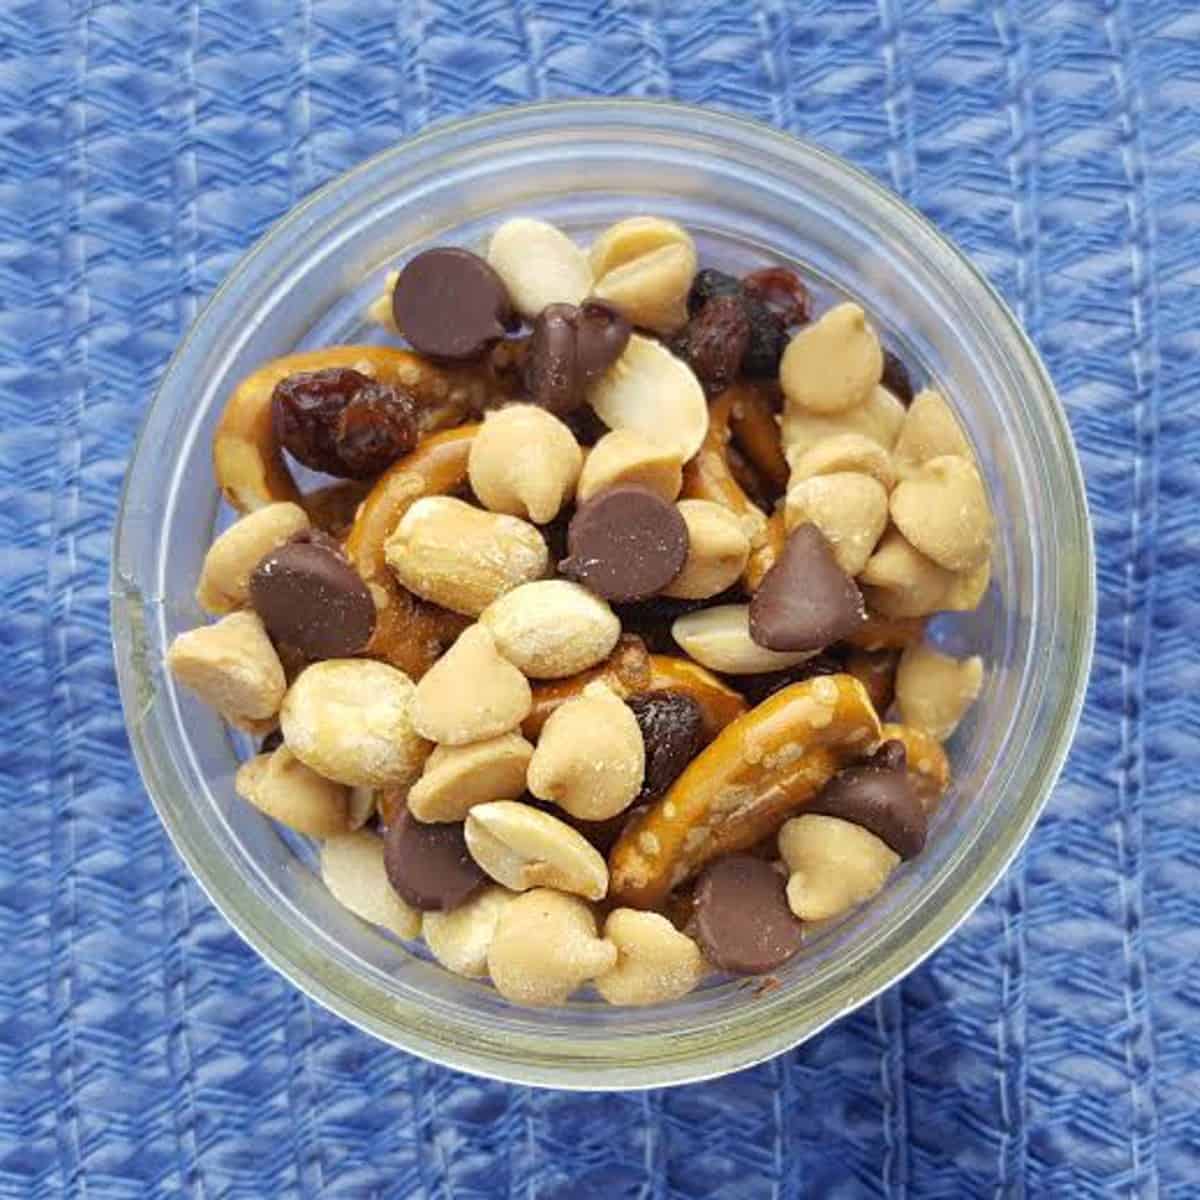 Dark Chocolate trail mix in a mason jar on a blue rustick background. The trail mix contains nuts, fruits, and seeds. It also contains dark chocolate chips and pretzels